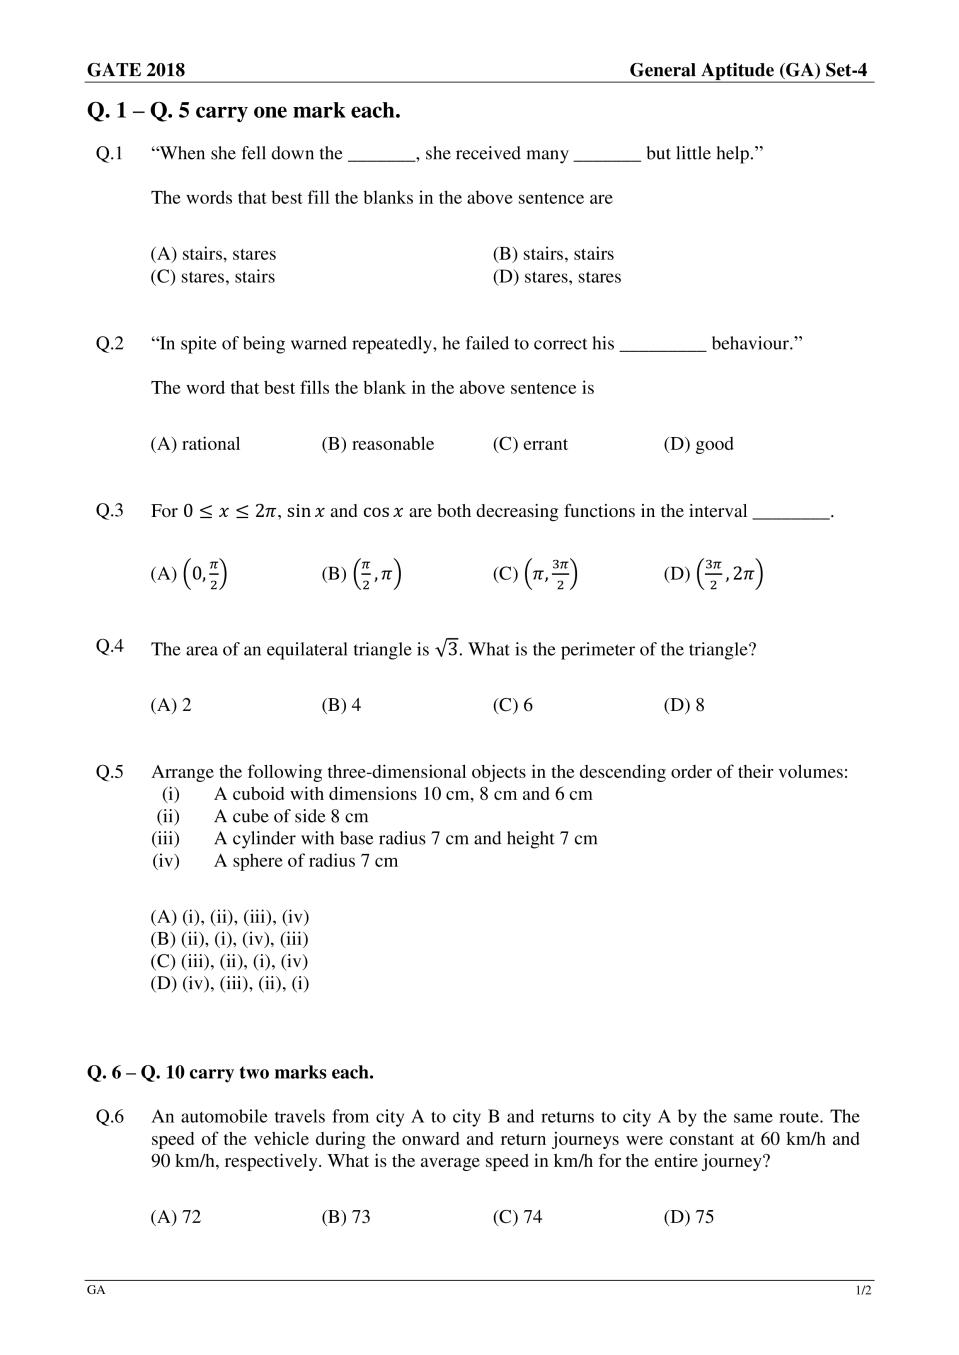 GATE 2018 Textile Engineering and Fibre Science Question Paper with Answer - Page 1